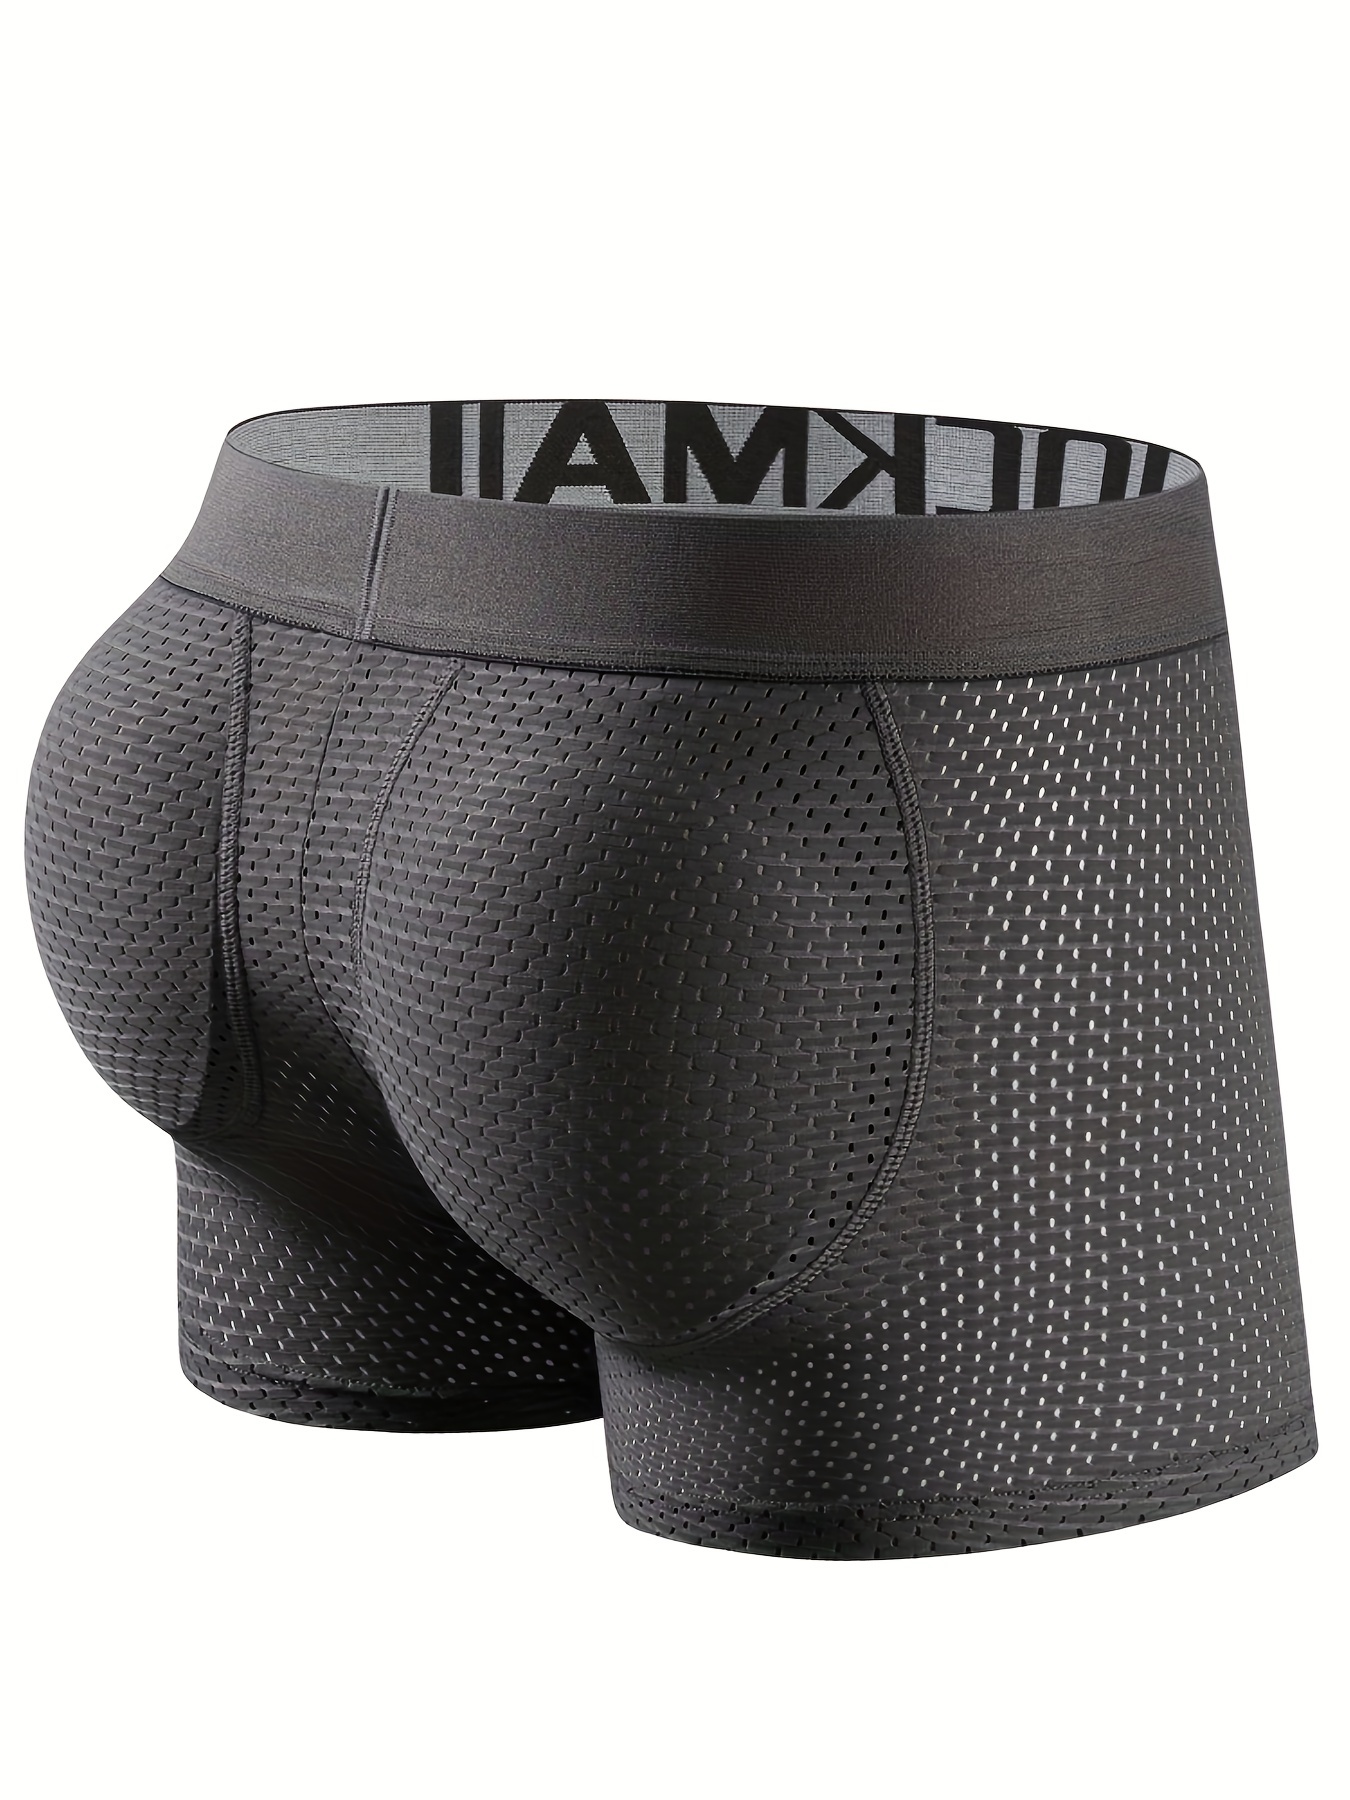  SAXX Men's Underwear – ULTRA Super Soft Briefs for Men with  Built-In Pouch Support - Black, Small : Clothing, Shoes & Jewelry